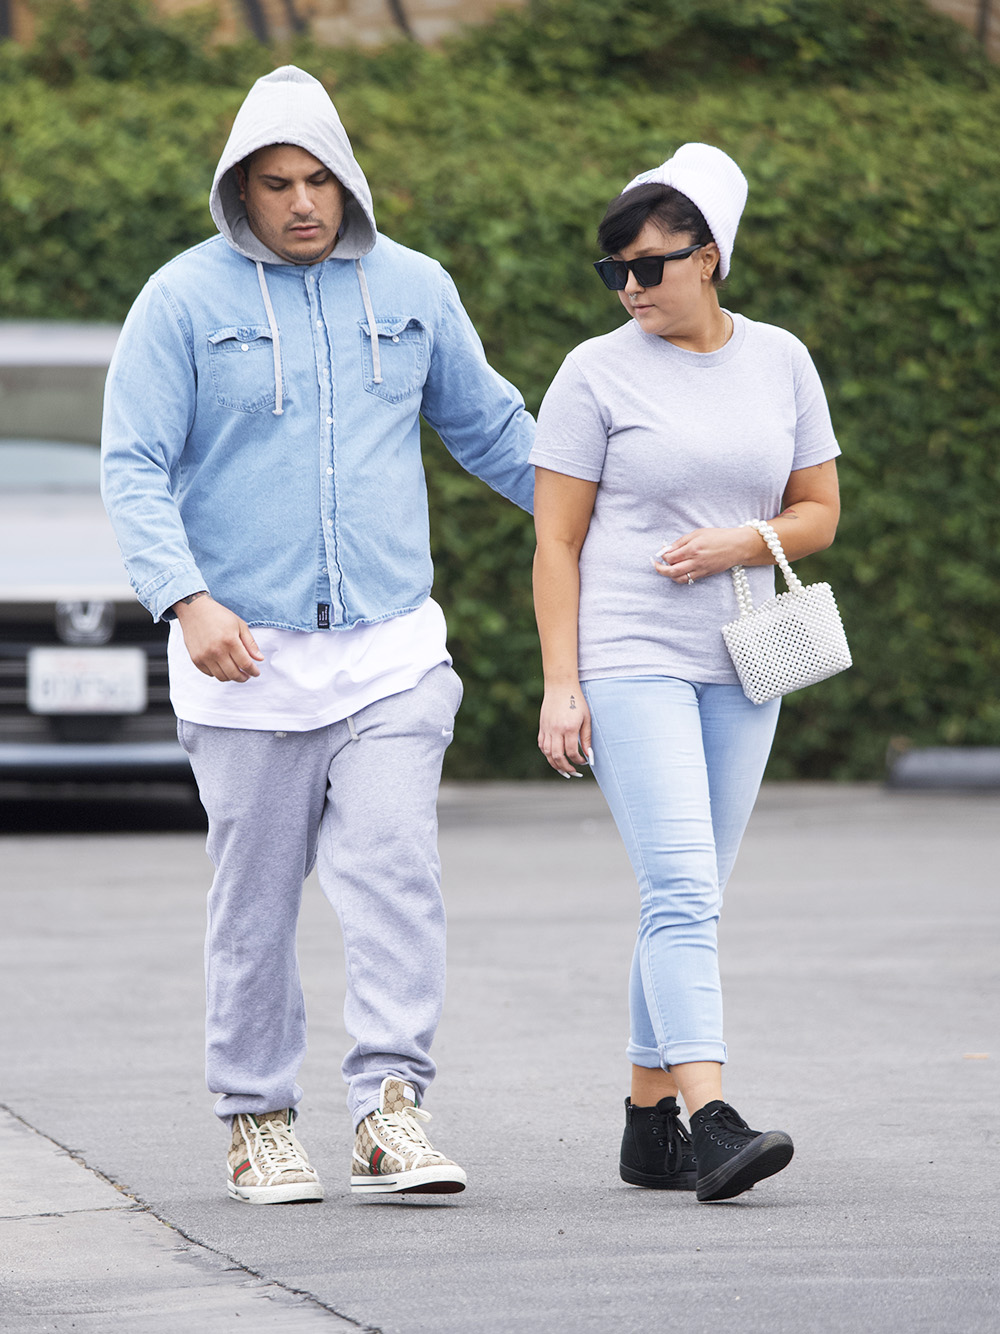 Amanda Bynes reunites with fiancé Paul Michael after cops are called over a domestic dispute Amanda Bynes reunites with fiancé Paul Michael after cops been called in for a domestic dispute, Los Angeles, California, USA - April 28, 2022